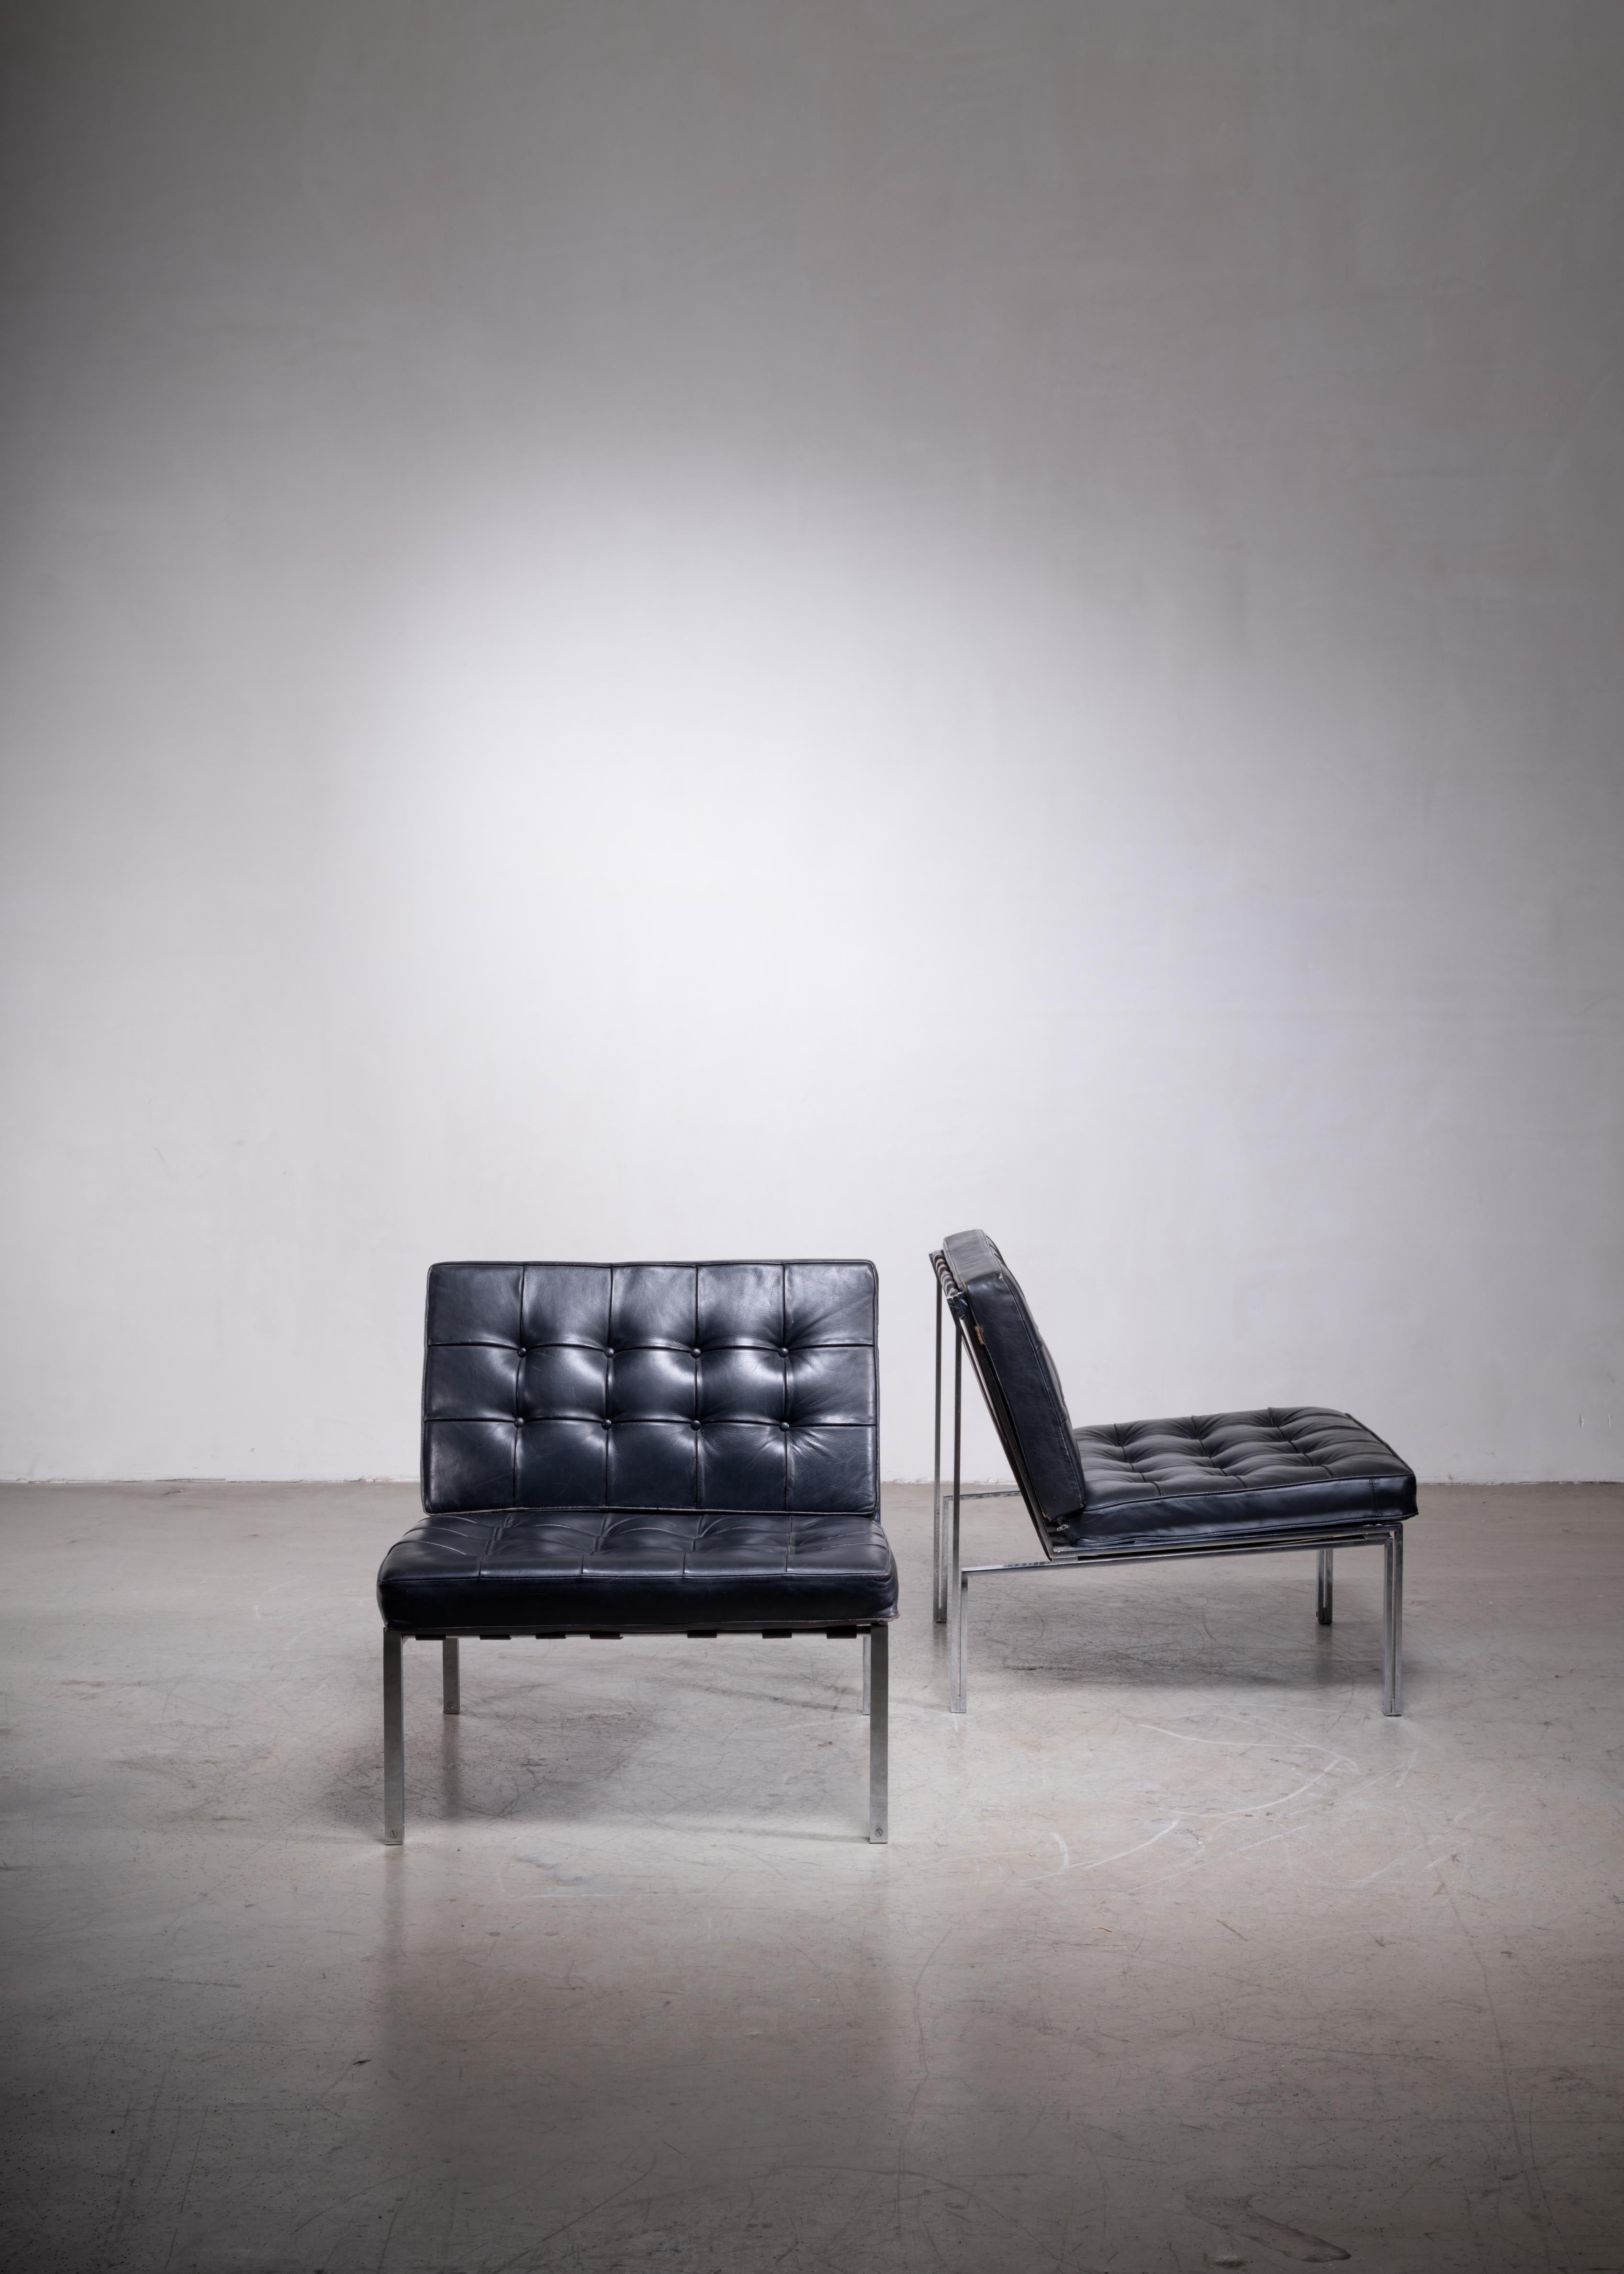 A pair of wonderful and luxurious model 'KT 221' easy chairs by Swiss designer Kurt Thut. The chairs are made of a chrome-plated steel frame with tufted leather cushions, supported by leather straps.